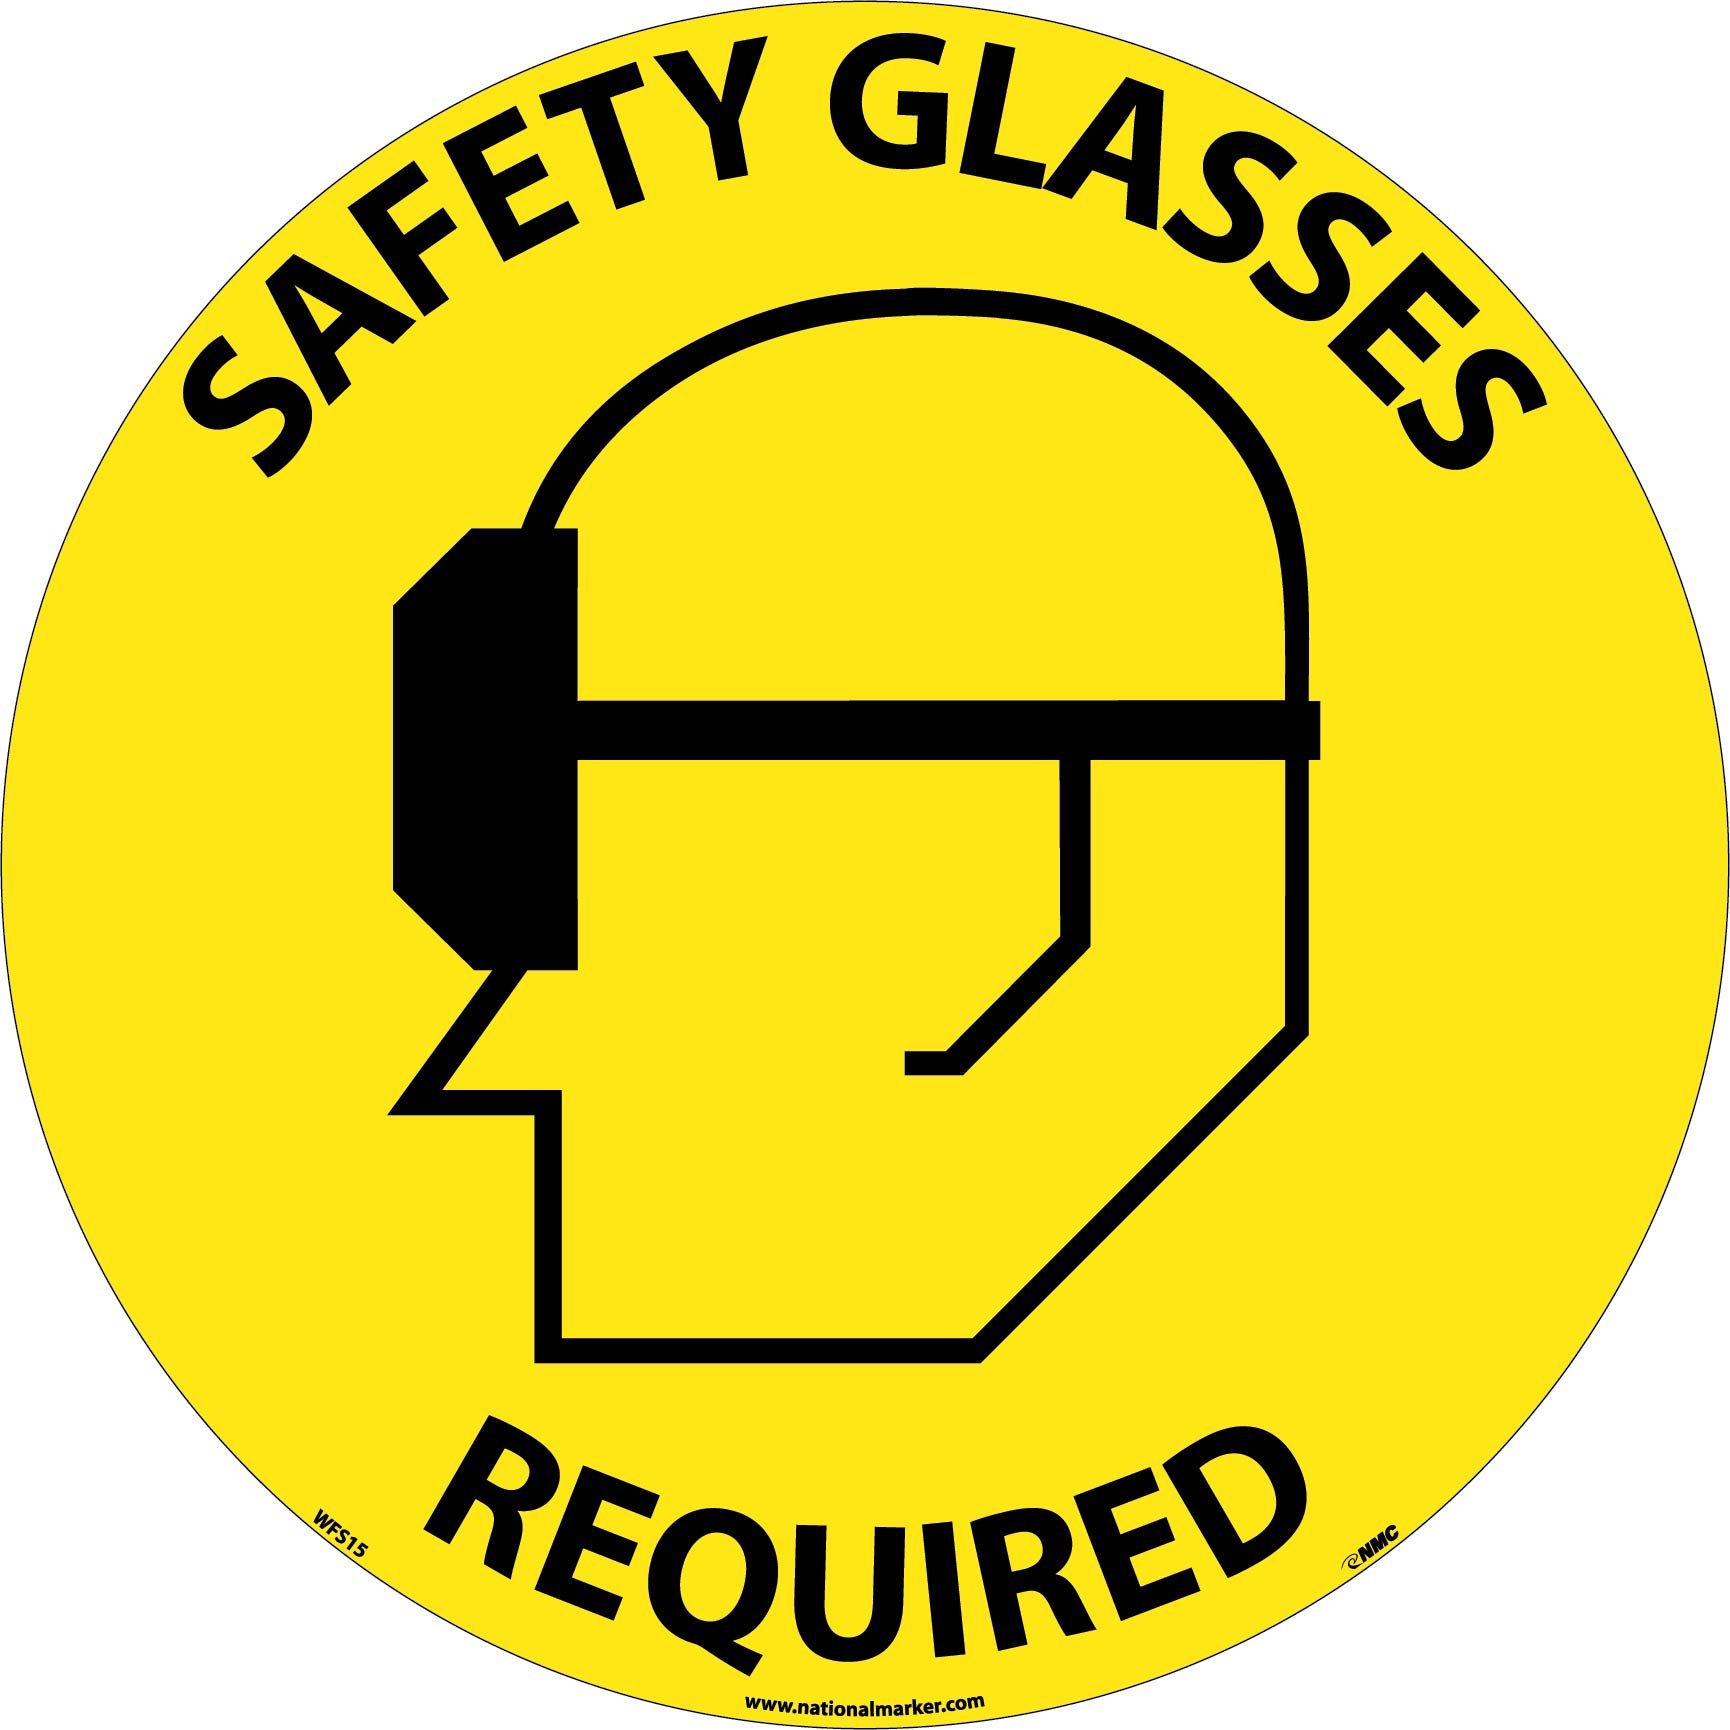 Cartoon Safety Goggles Clipart - The Cliparts